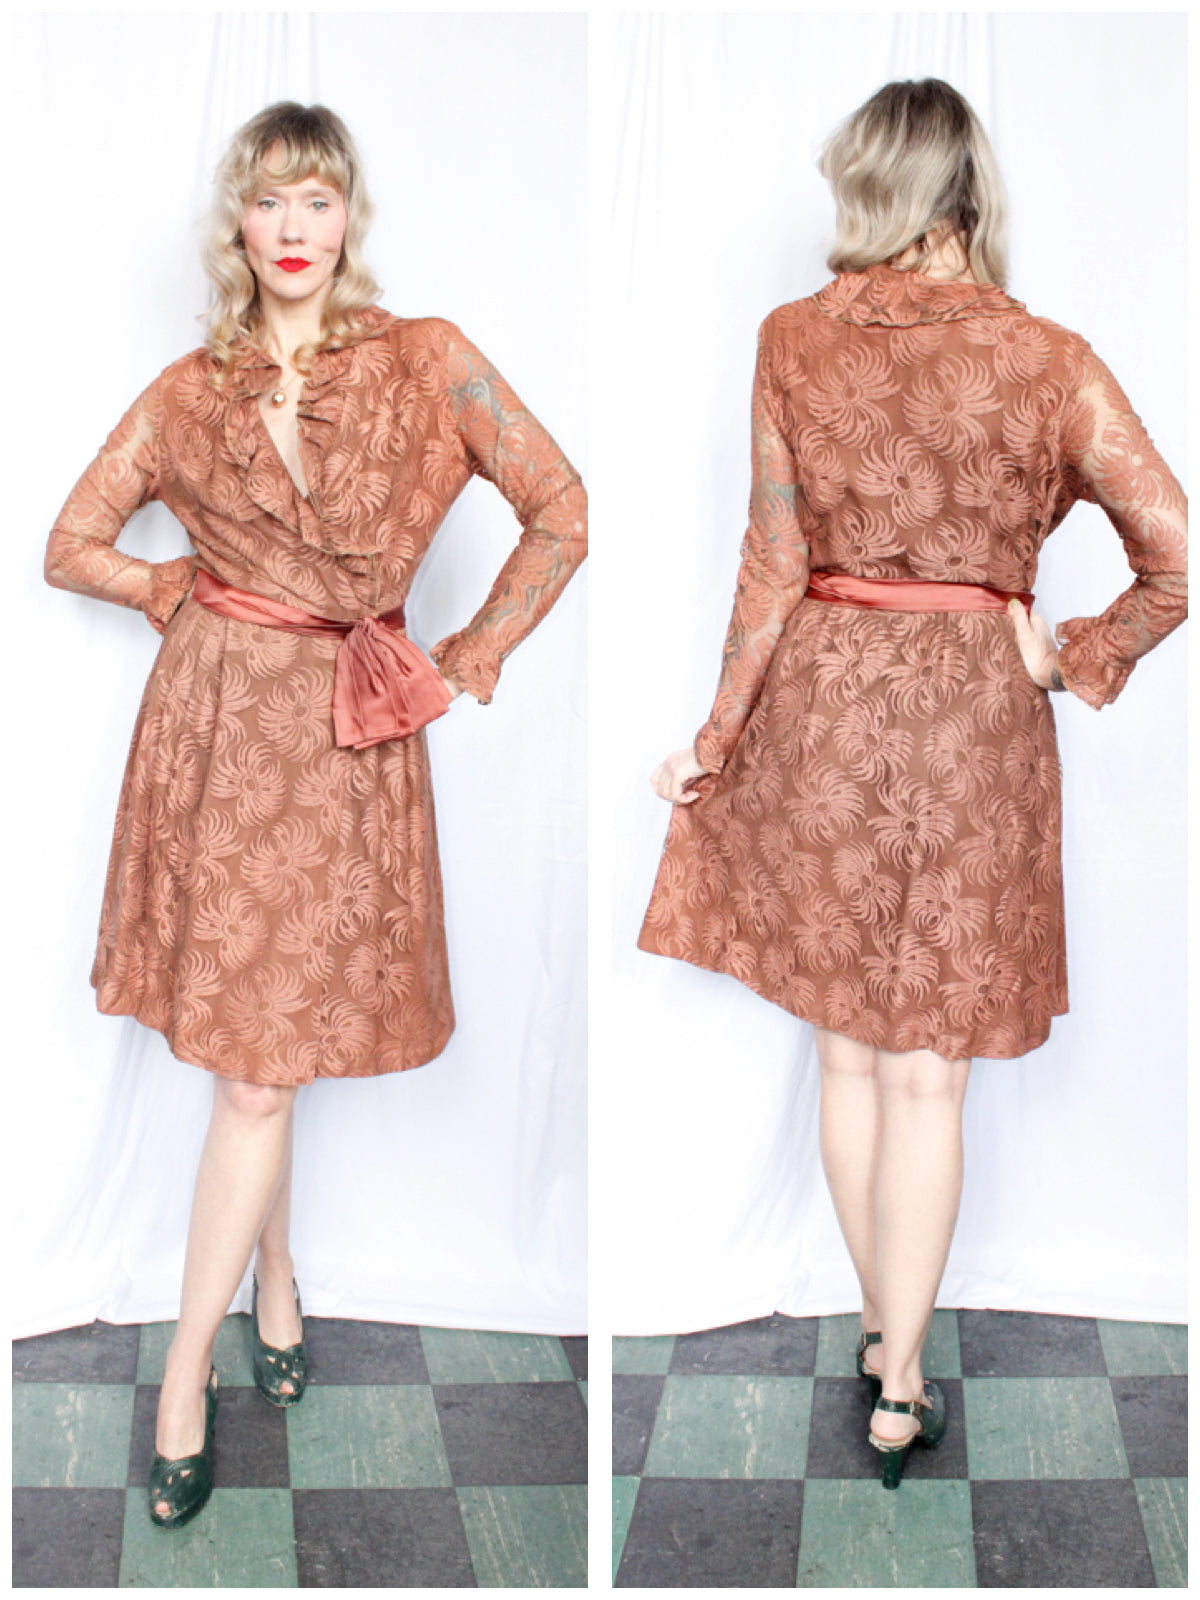 1960s Rose Brown Floral Lace Party Dress - Medium